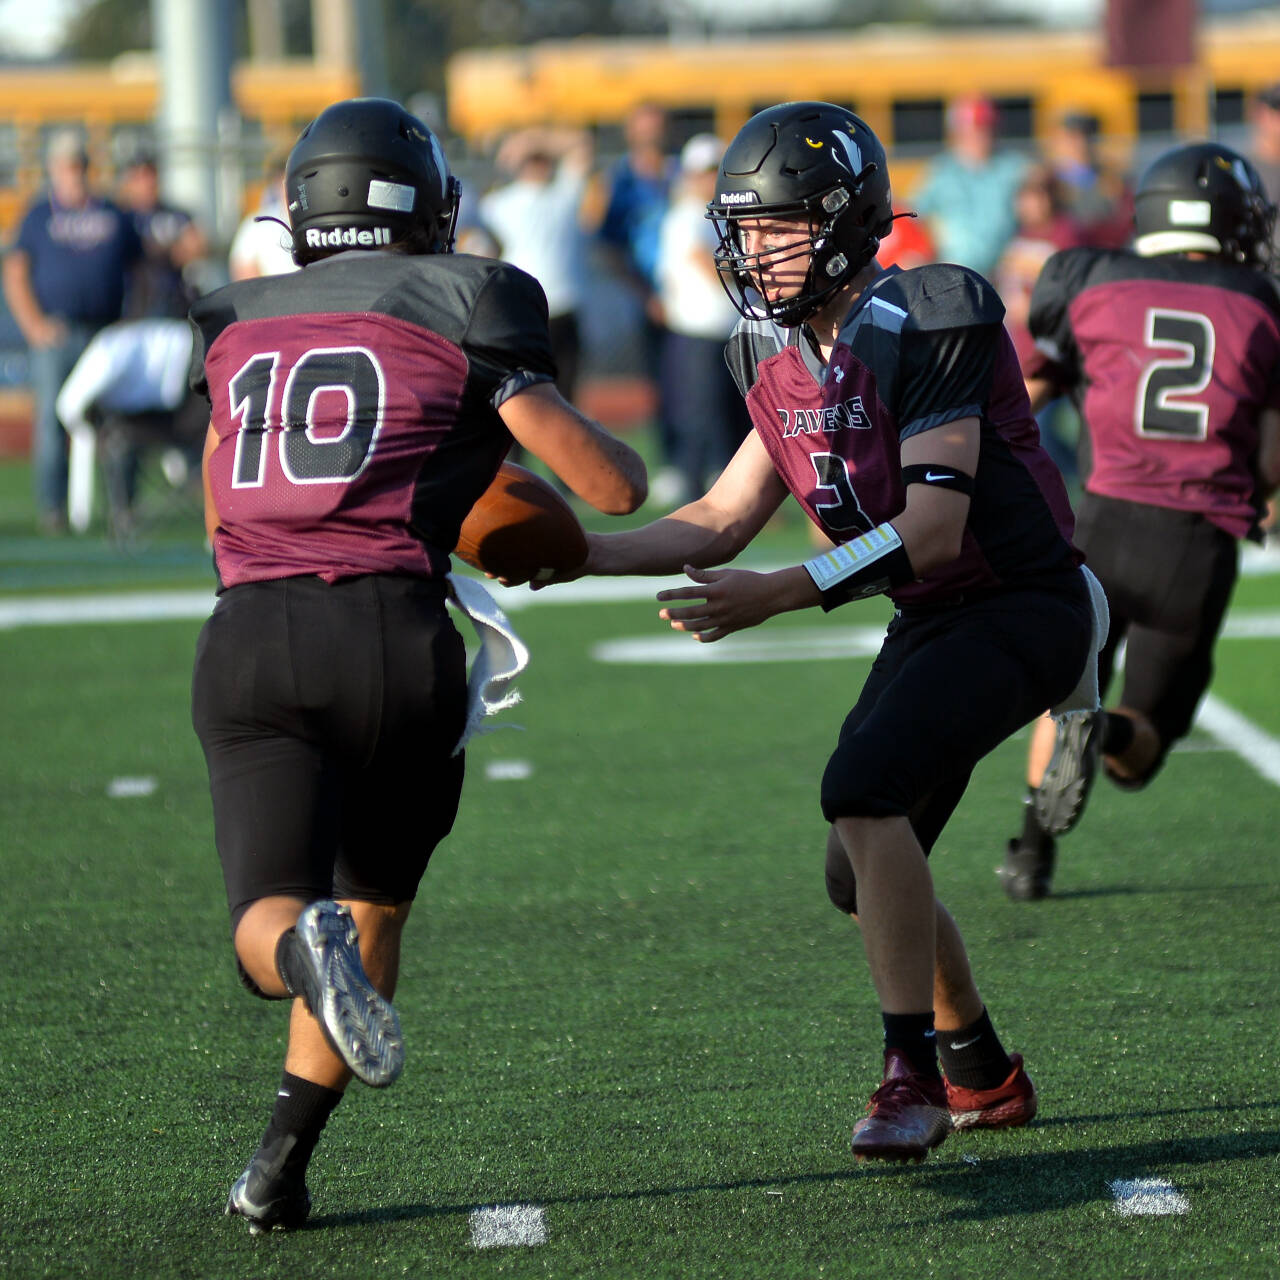 DAILY WORLD FILE PHOTO 
Raymond-South Bend quarterback Austin Snodgrass and running back Ferrill Johnson (10) — seen here in a game on Oct. 15 — will lead the Ravens into a first-round 2B state playoff game against Goldendale on Friday in South Bend.